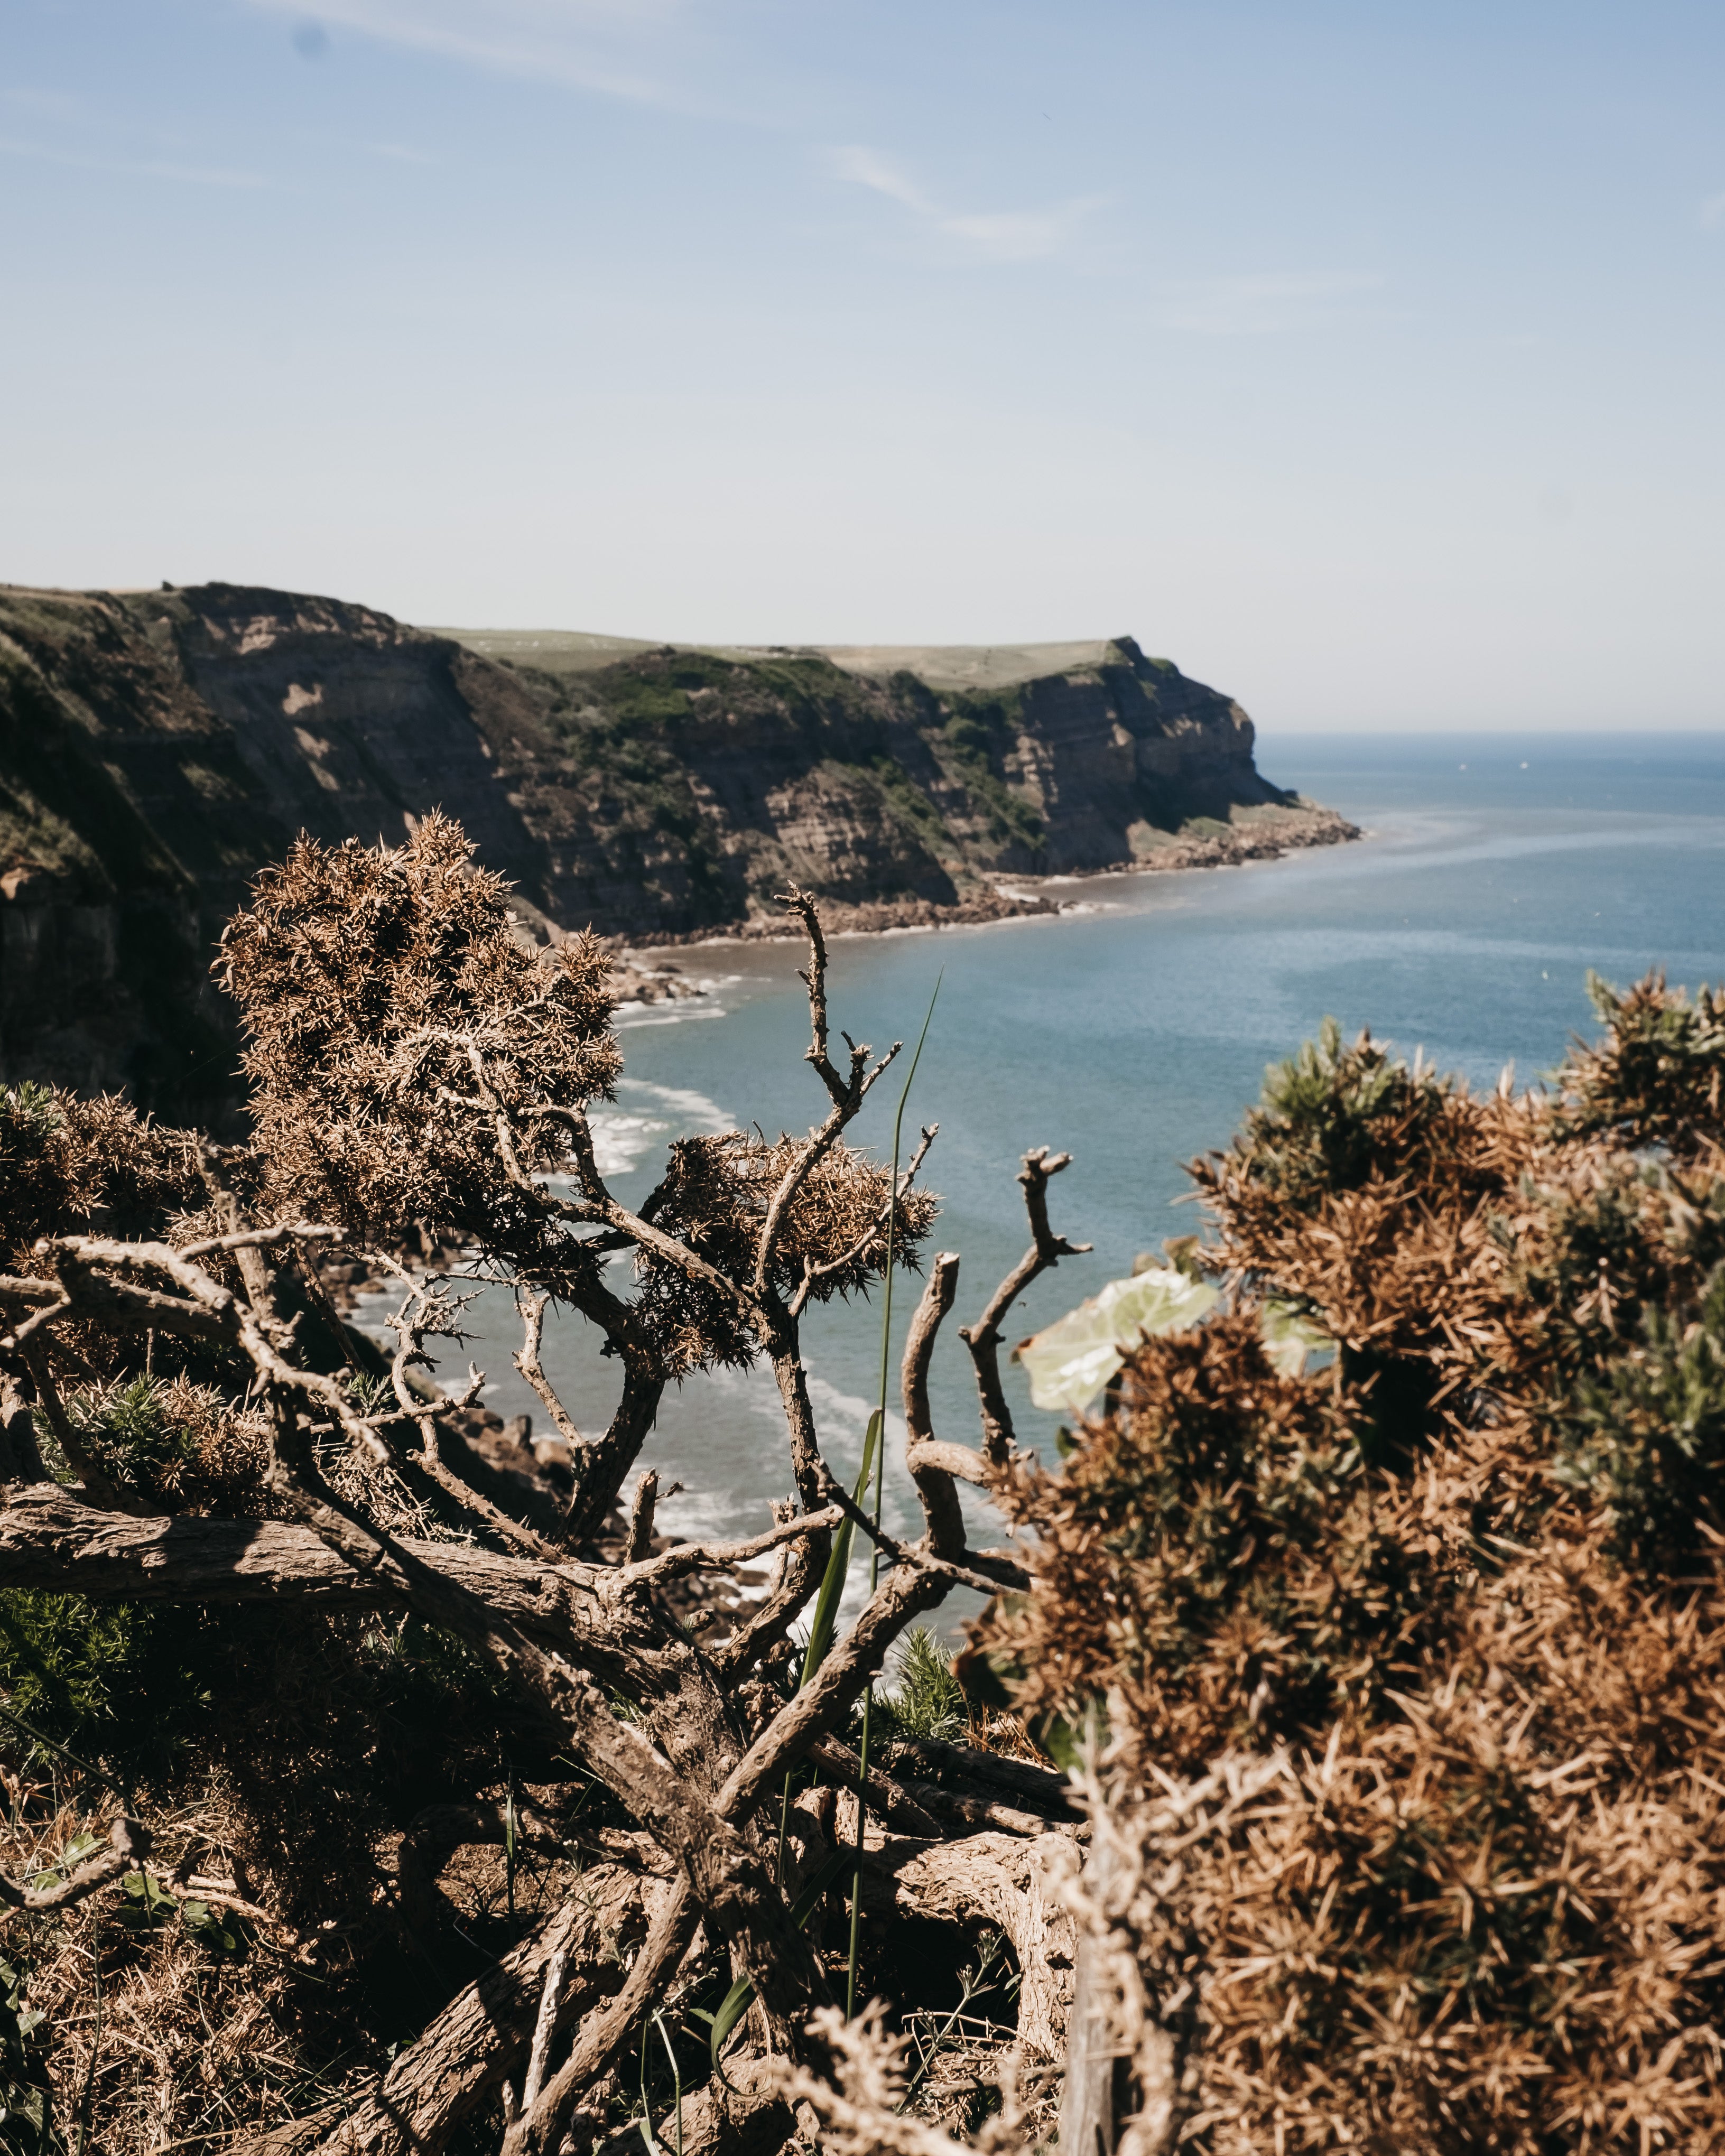 Go explore: Cleveland Way (Robin Hood's Bay to Whitby)